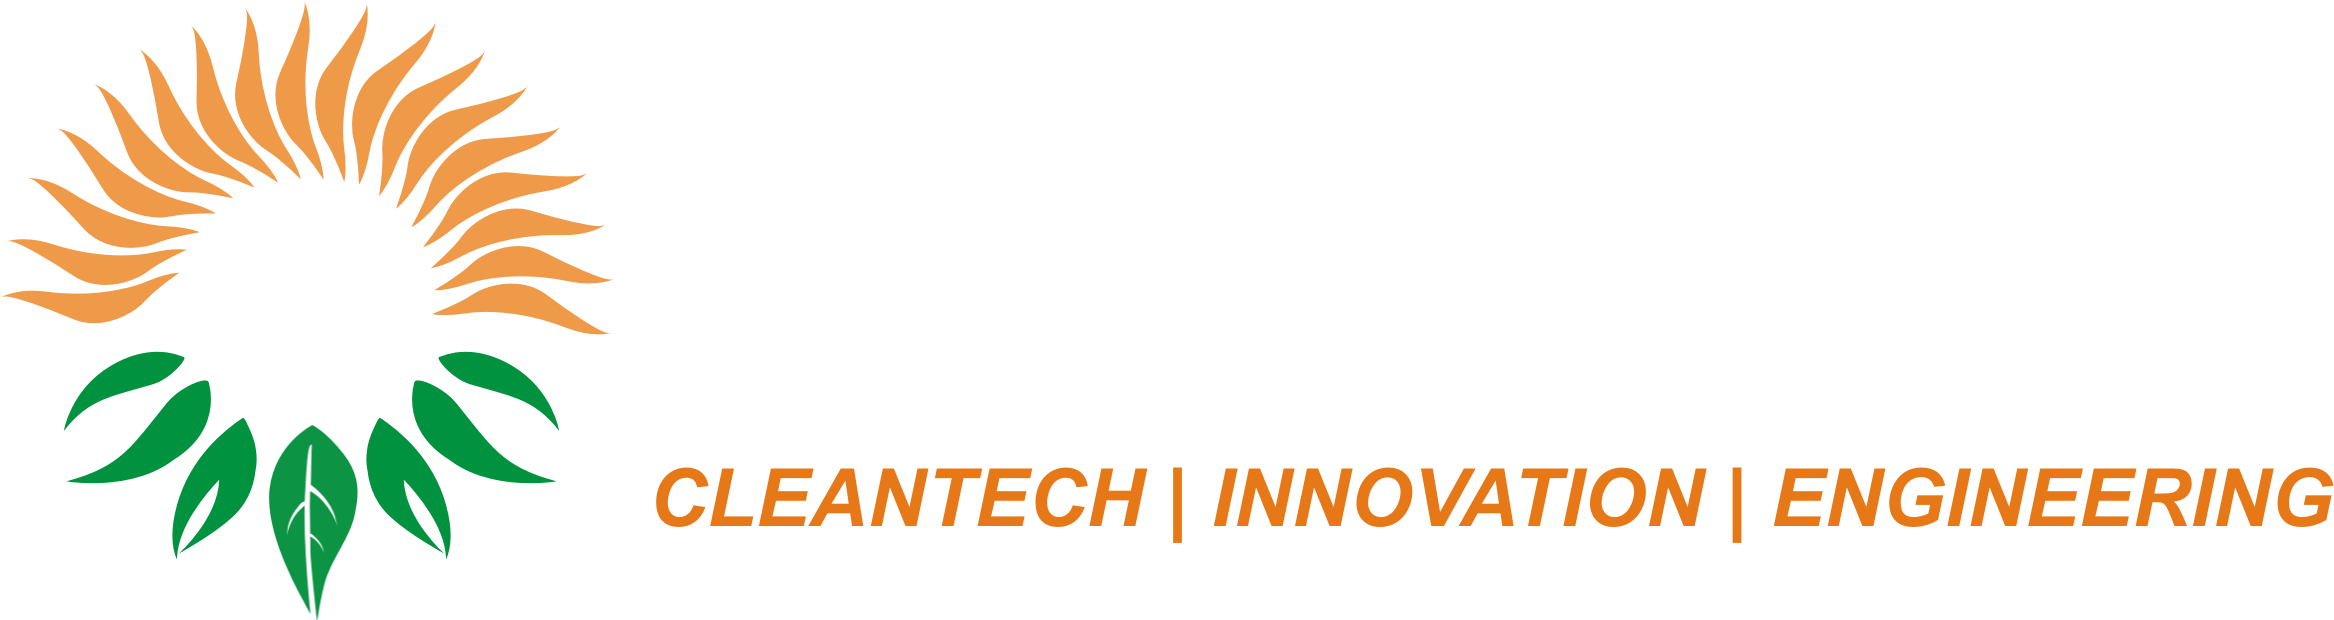 Organic Recycling Systems SME IPO recommendations